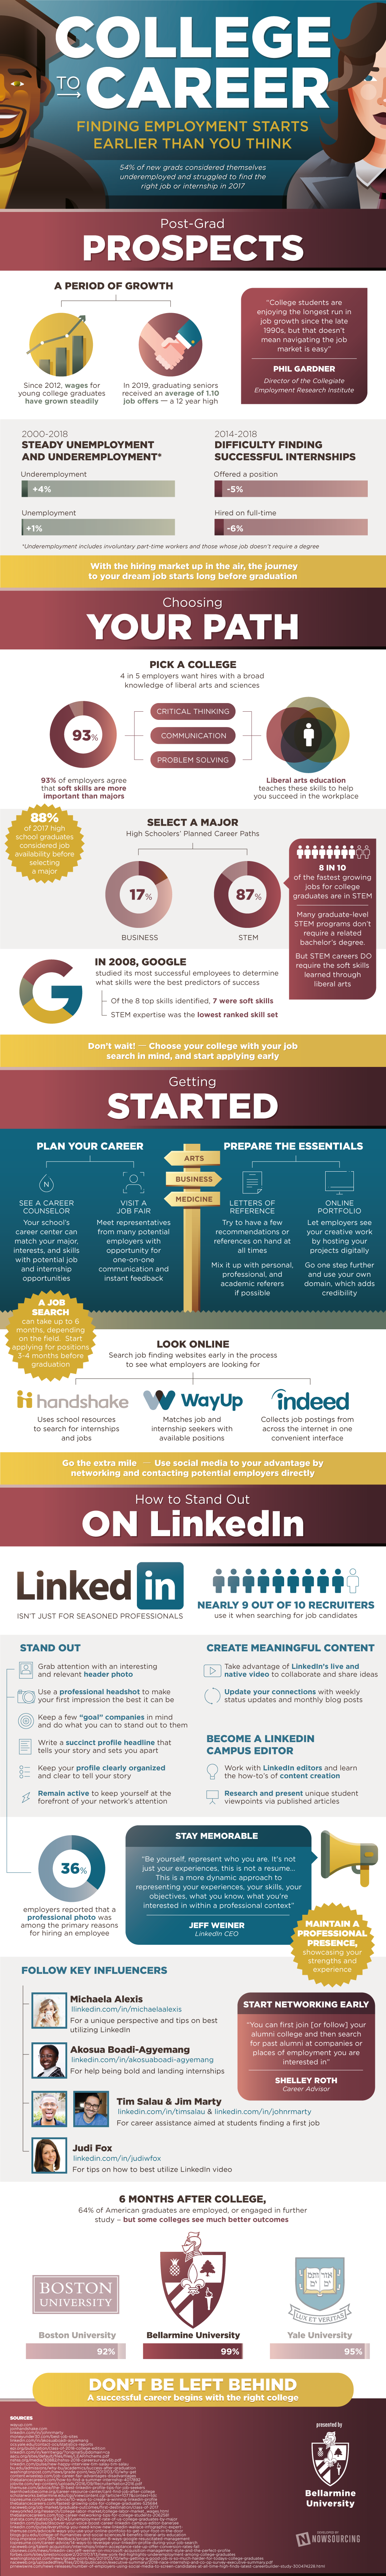 Give Your Career a Head Start #infographic